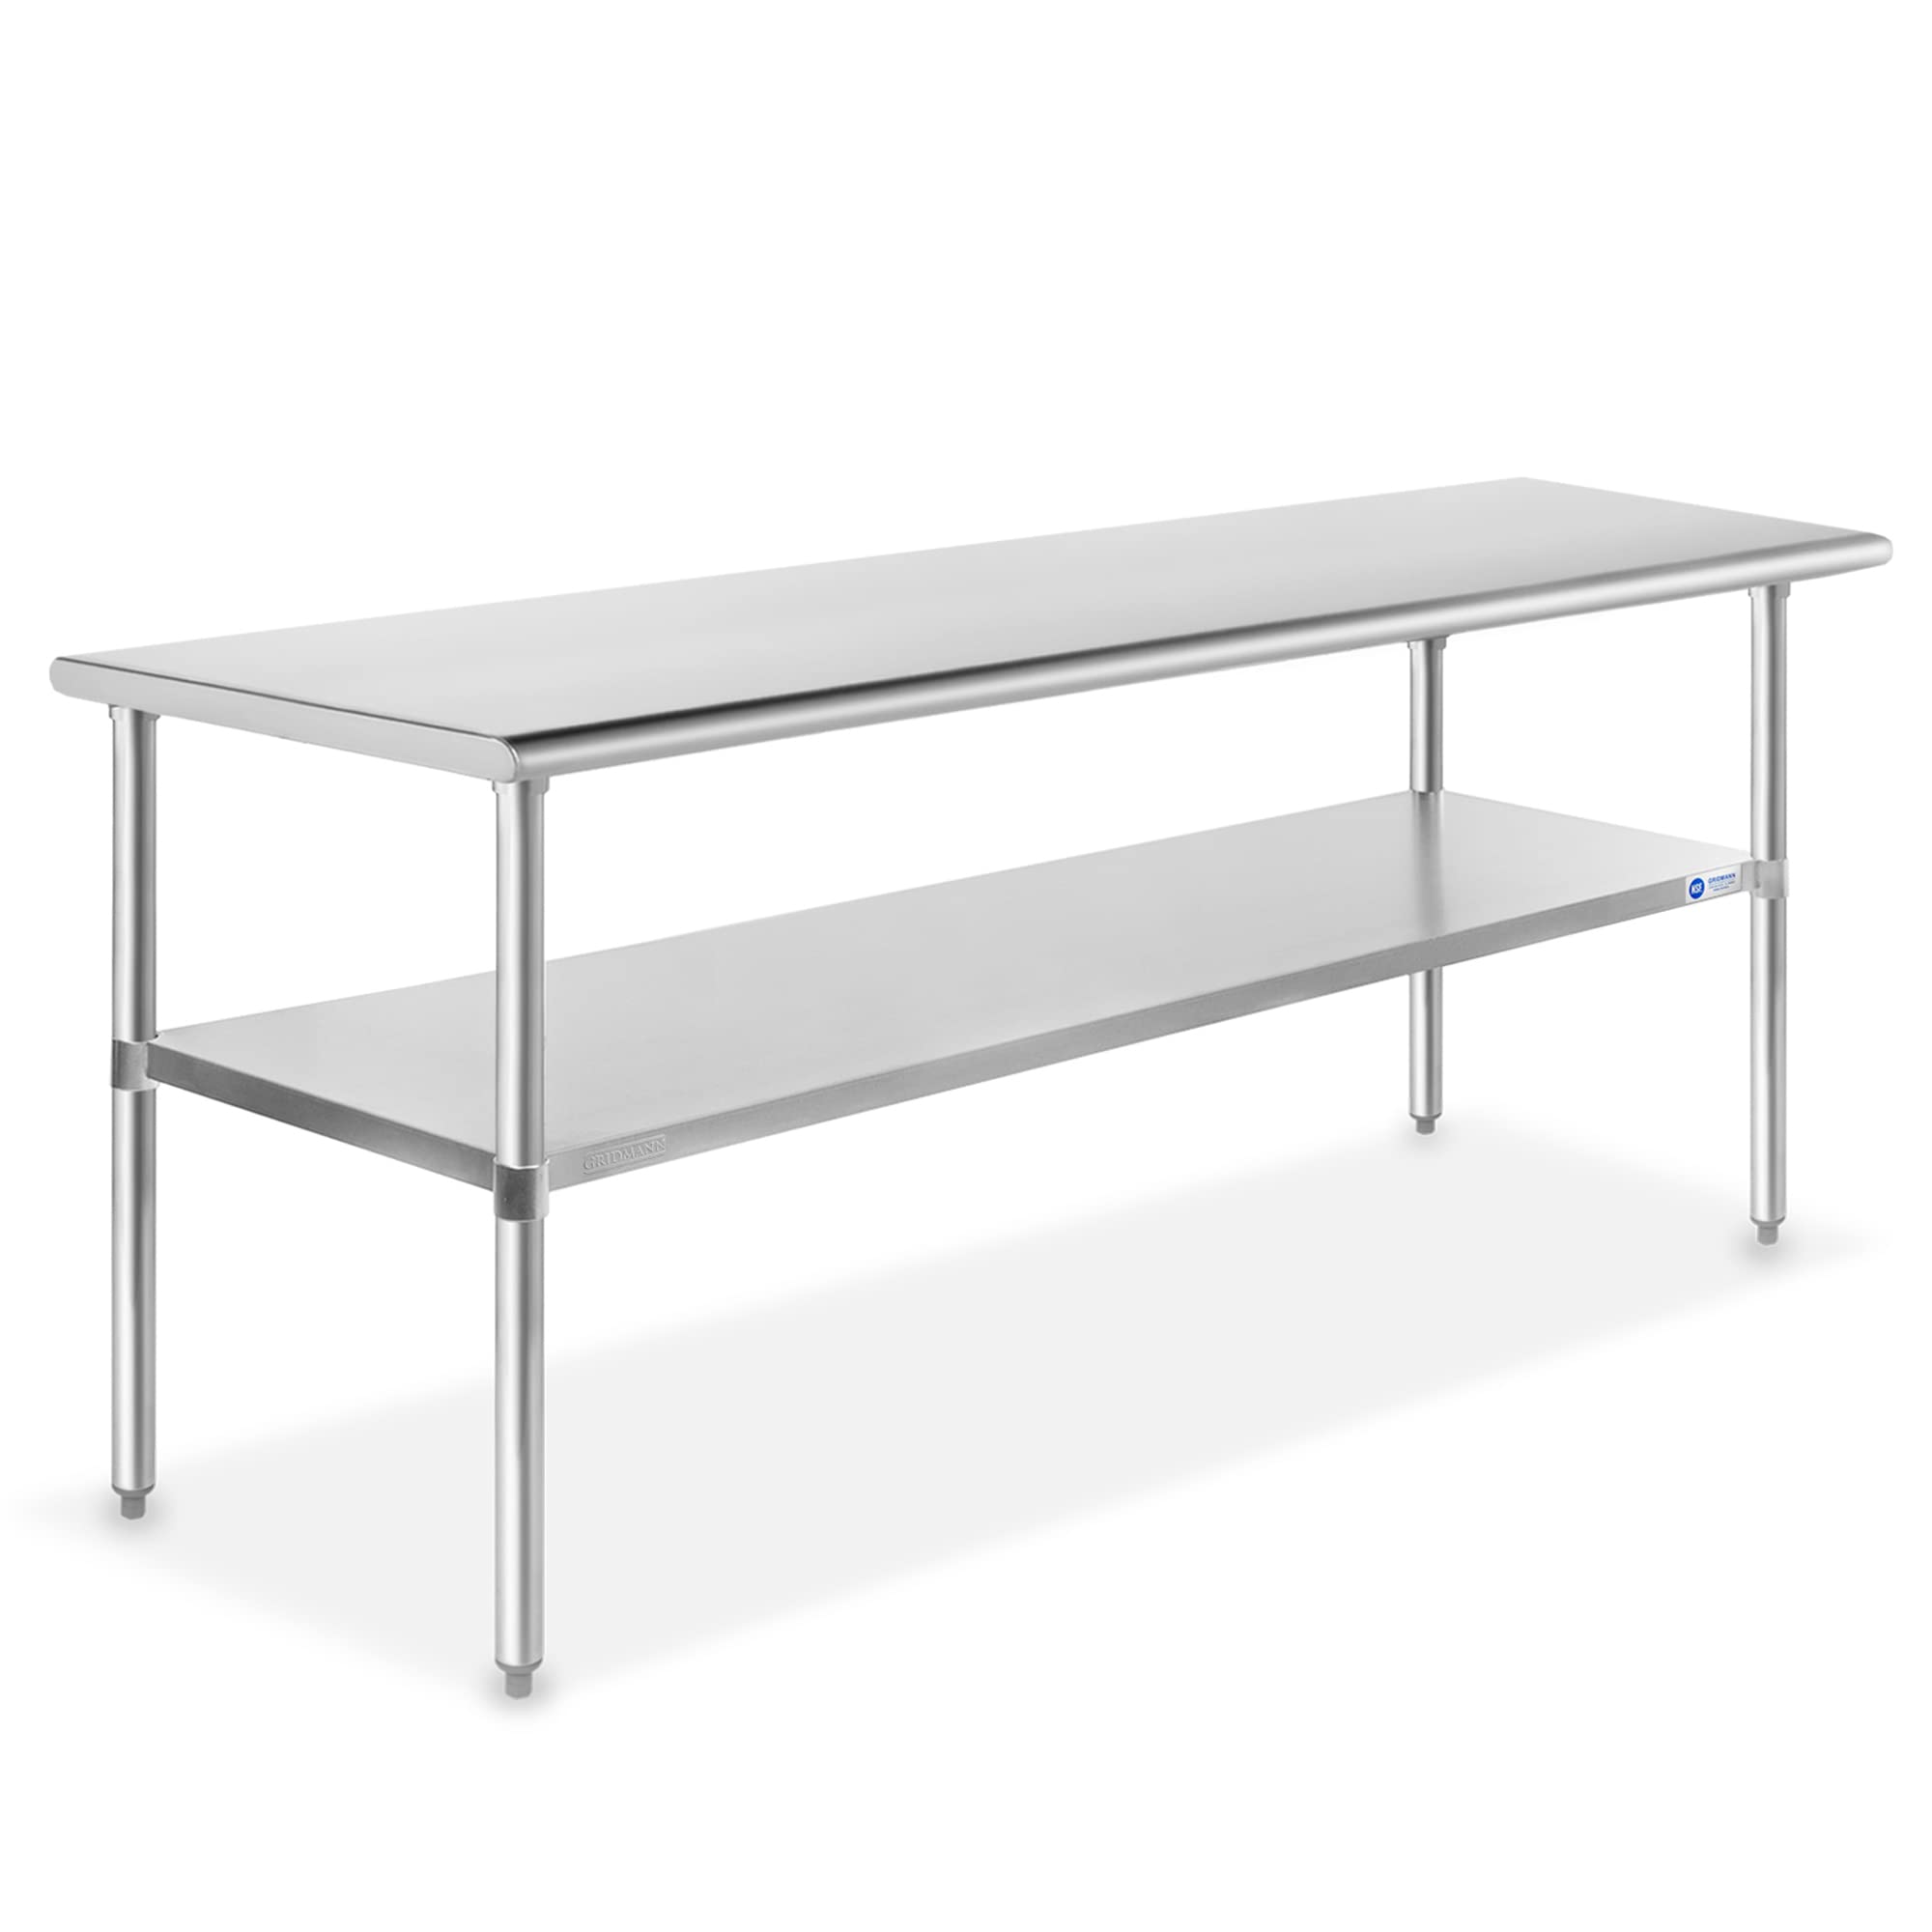 Gridmann Stainless Steel Work Table 72 x 30 Inches, NSF Commercial Kitchen Prep Table with Under Shelf for Restaurant and Home